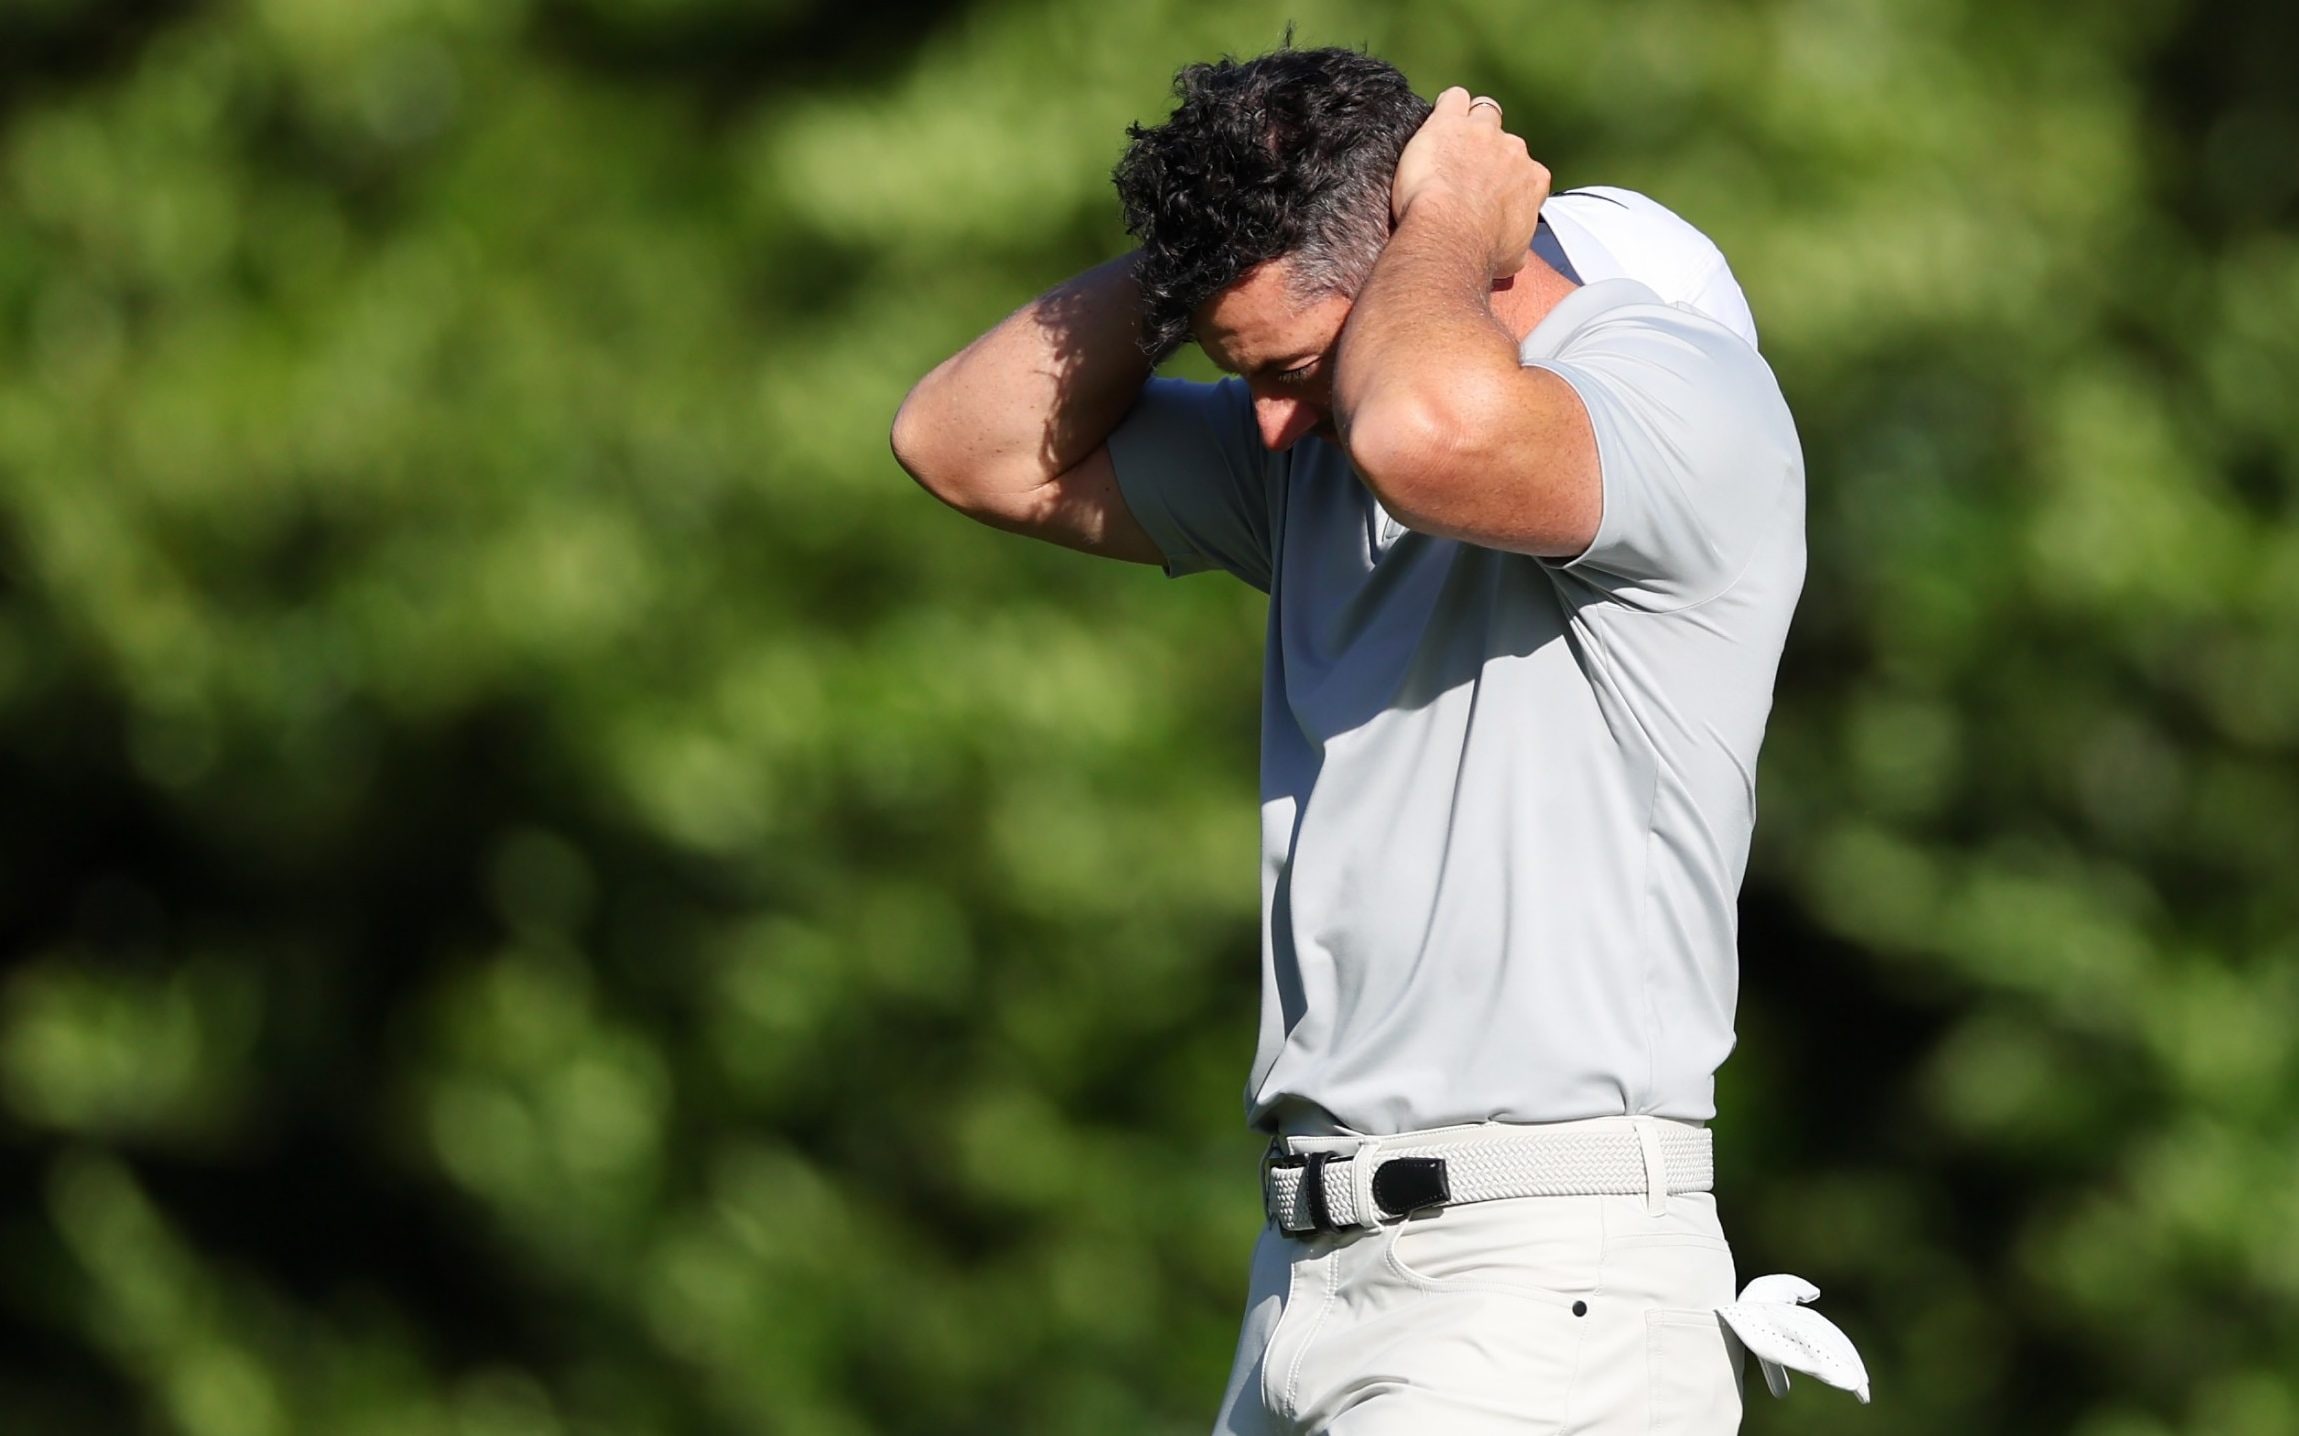 rory mcilroy quashes £750m liv rumours and commits to pga tour for life